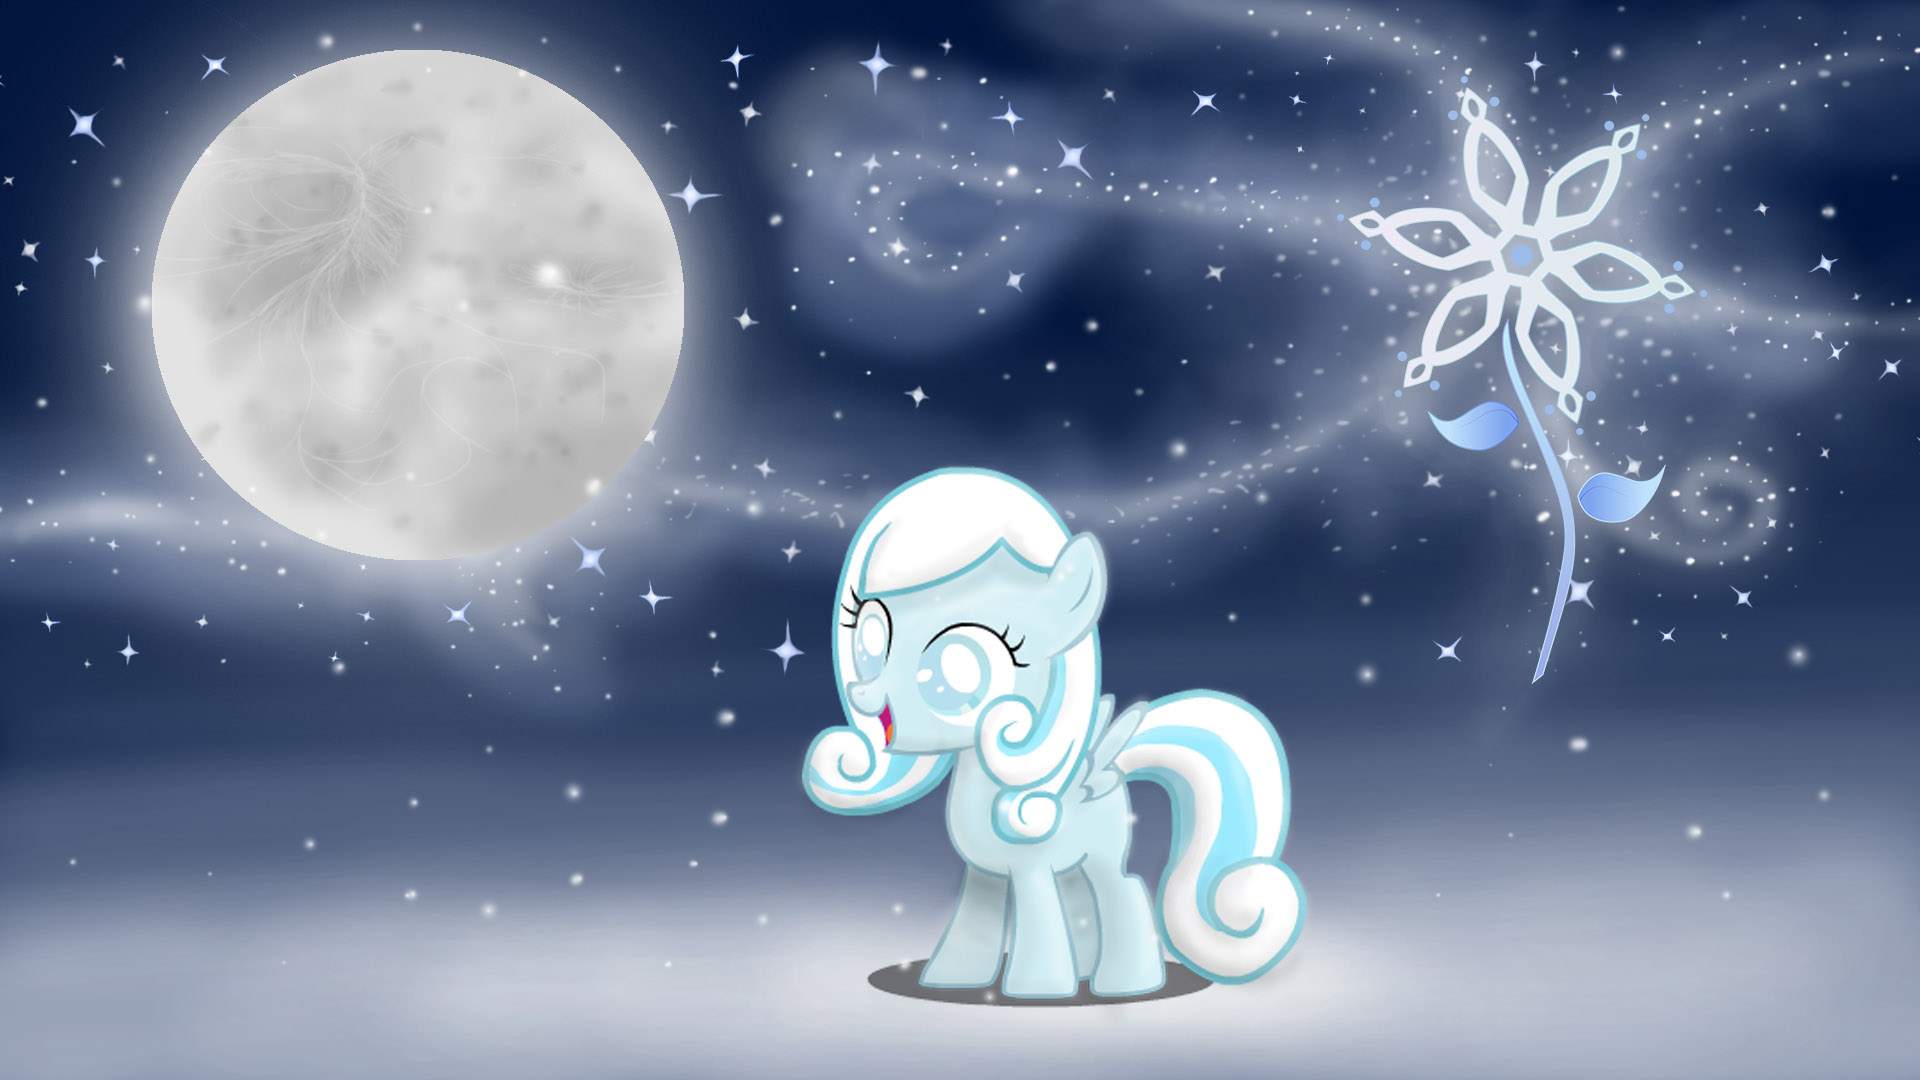 Snowdrop Wallpaper by Abion47 and MetalBluePhoenix